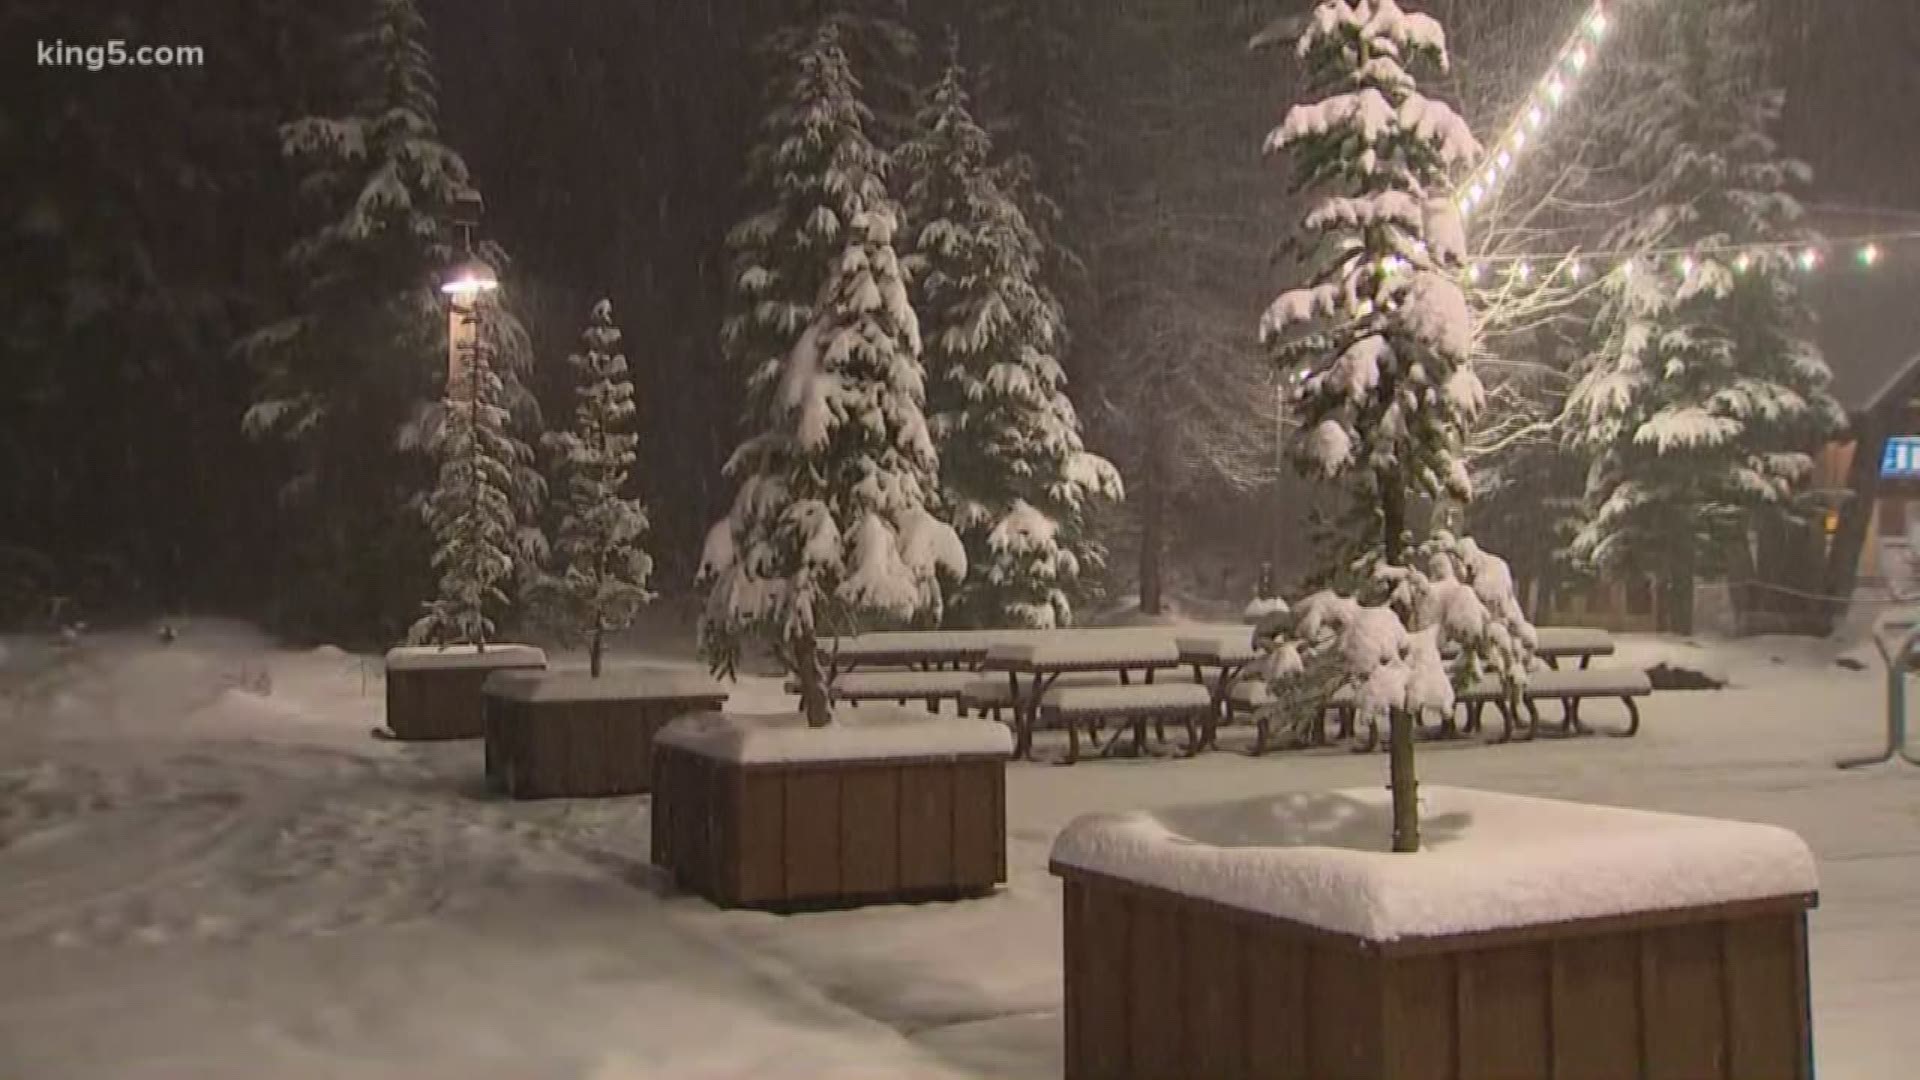 Students returning home for winter break will be met with snow conditions in the passes